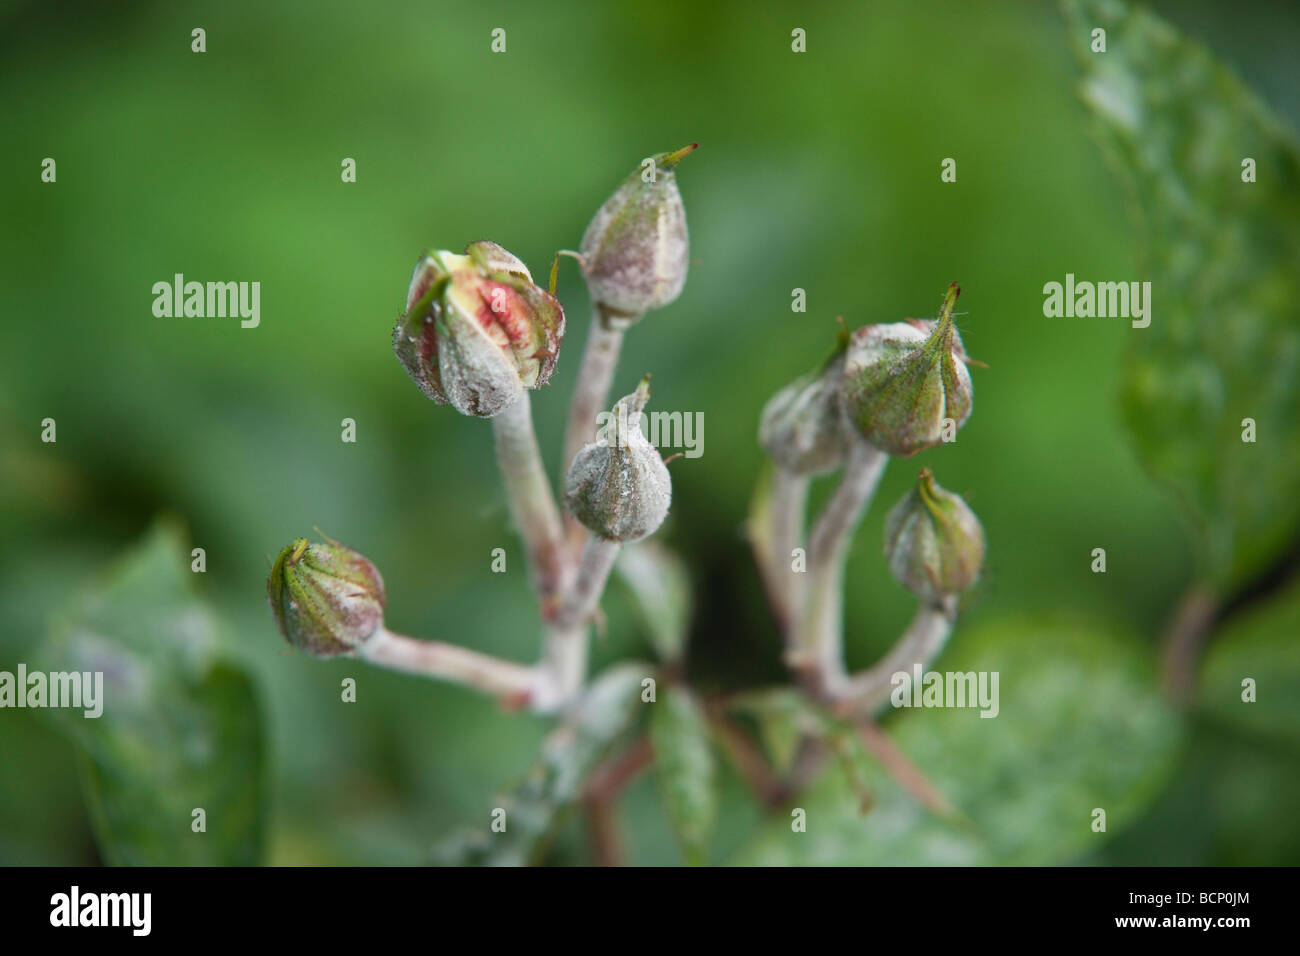 Powdery mildew on rose plant with buds Stock Photo